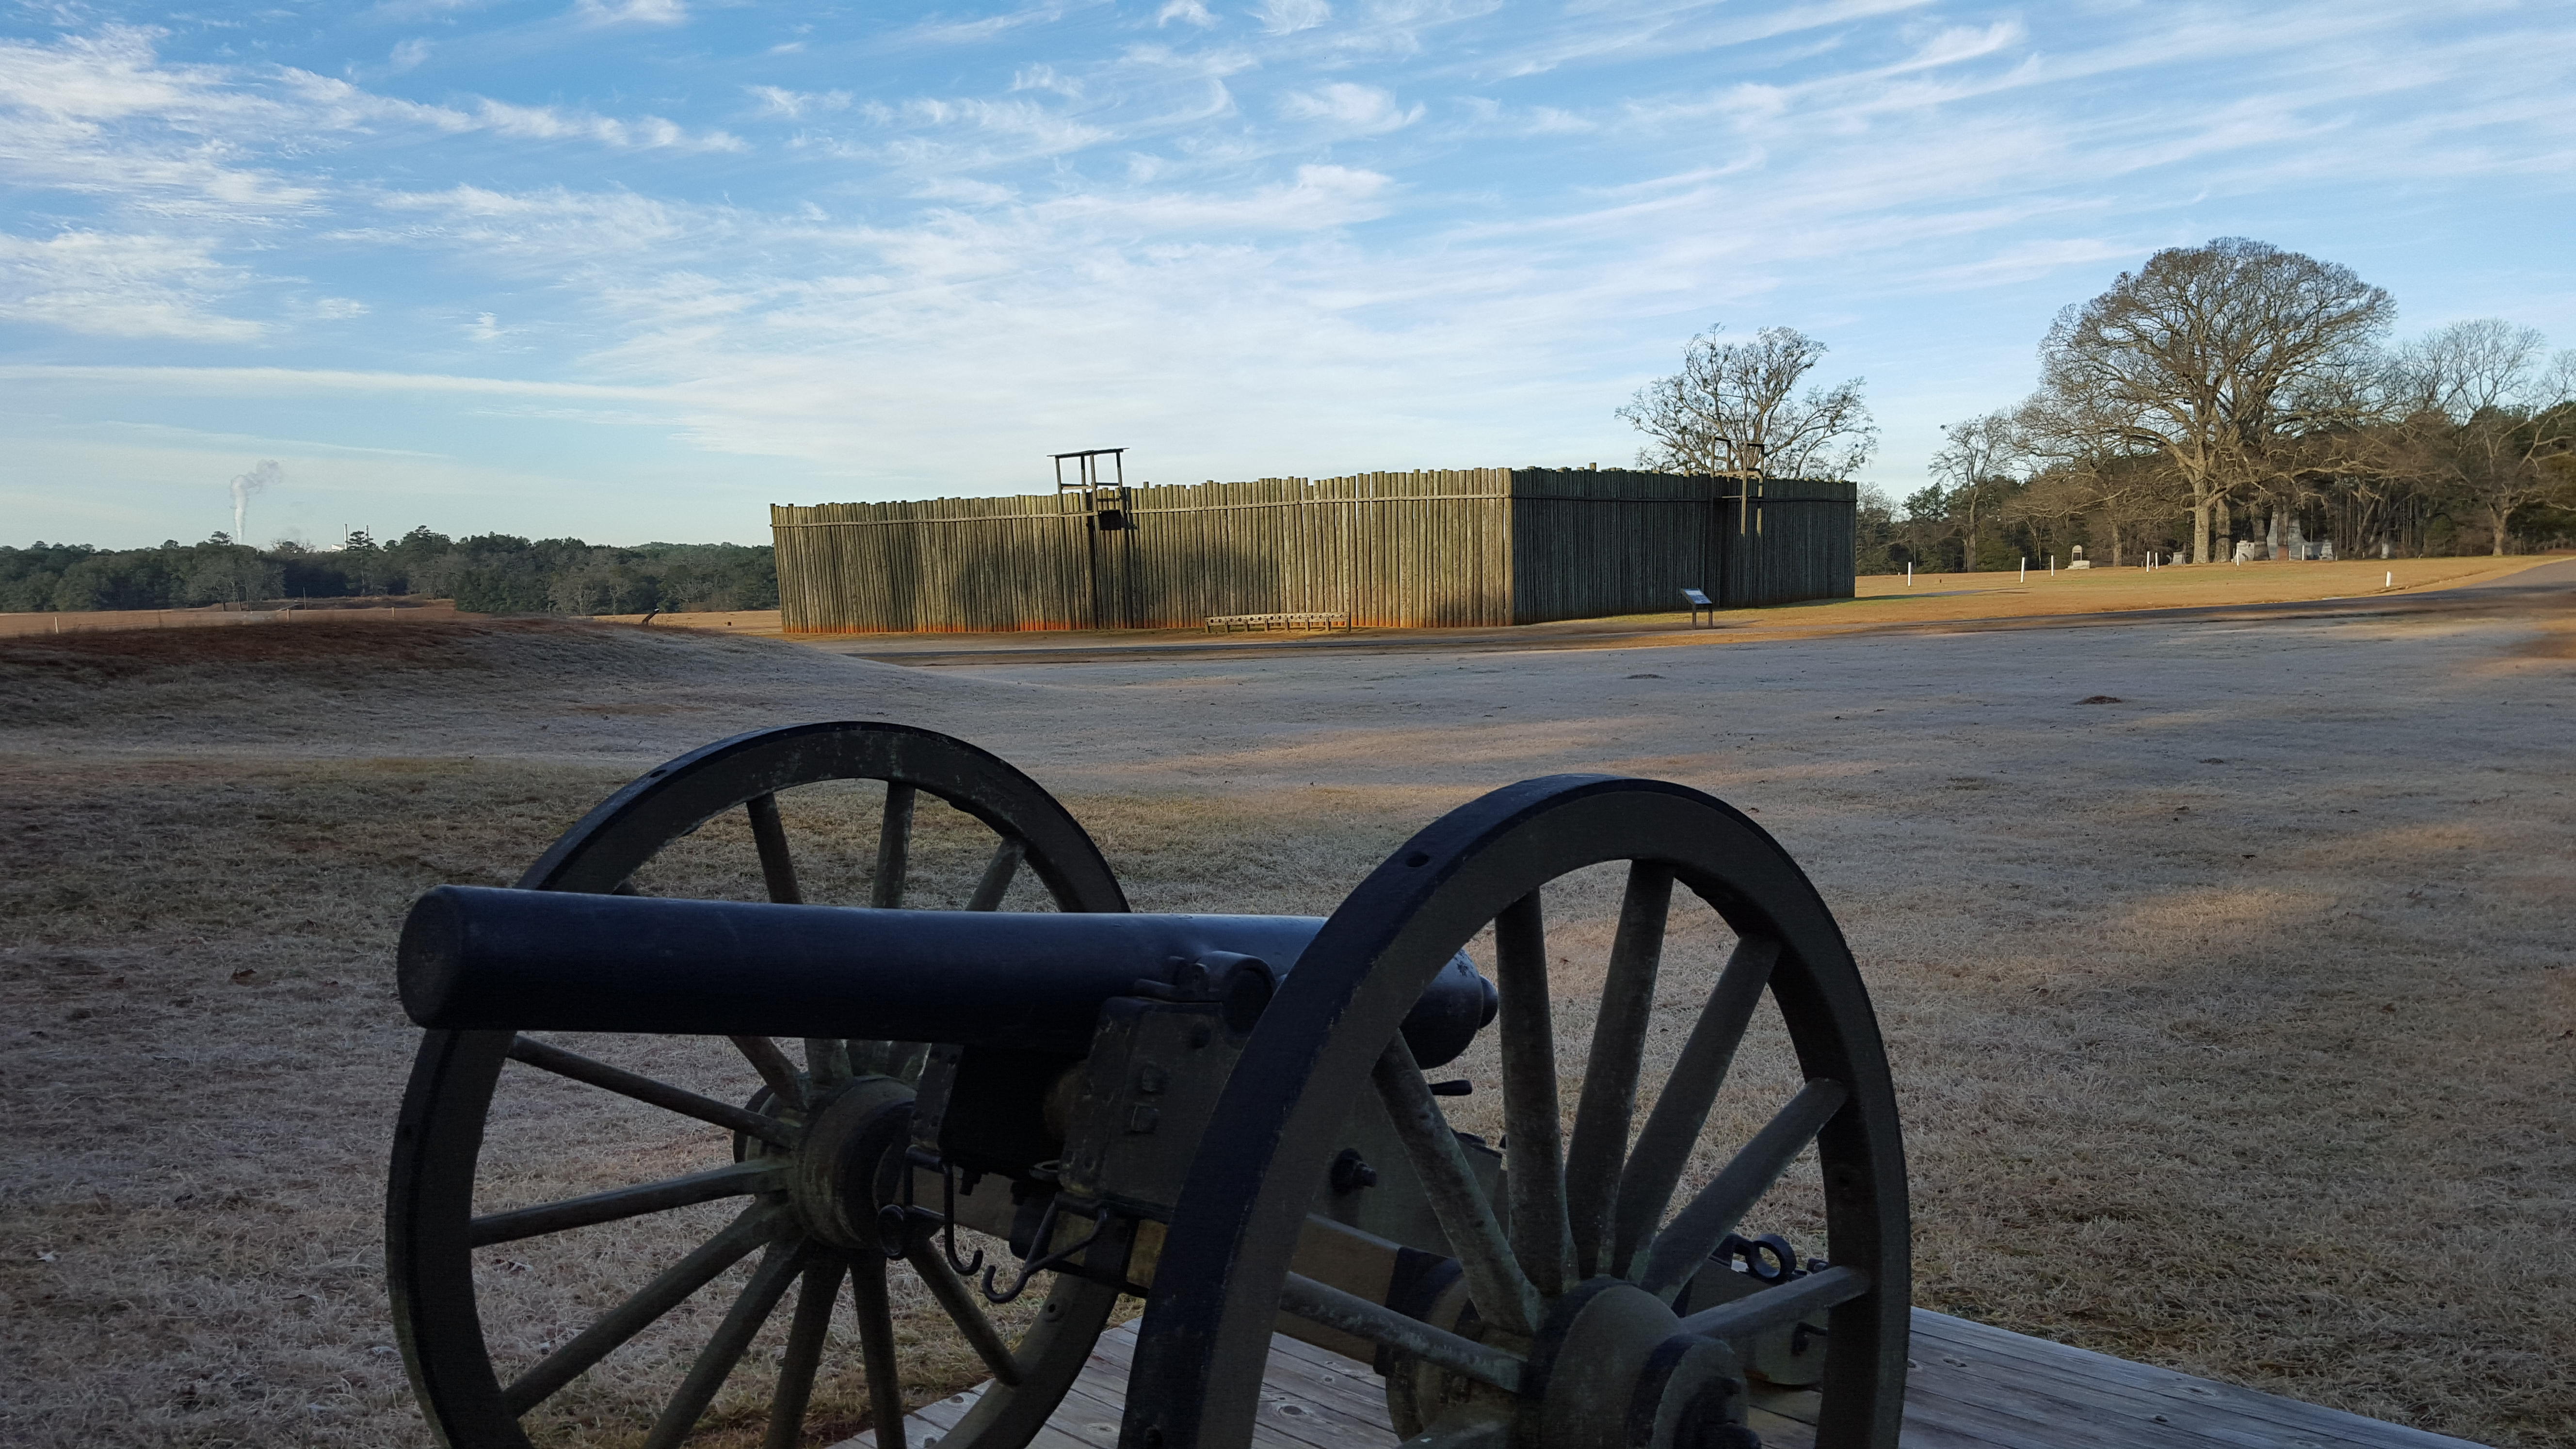 A cannon sits out in front of a replica of part of the wooden stockade walls once at Andersonville